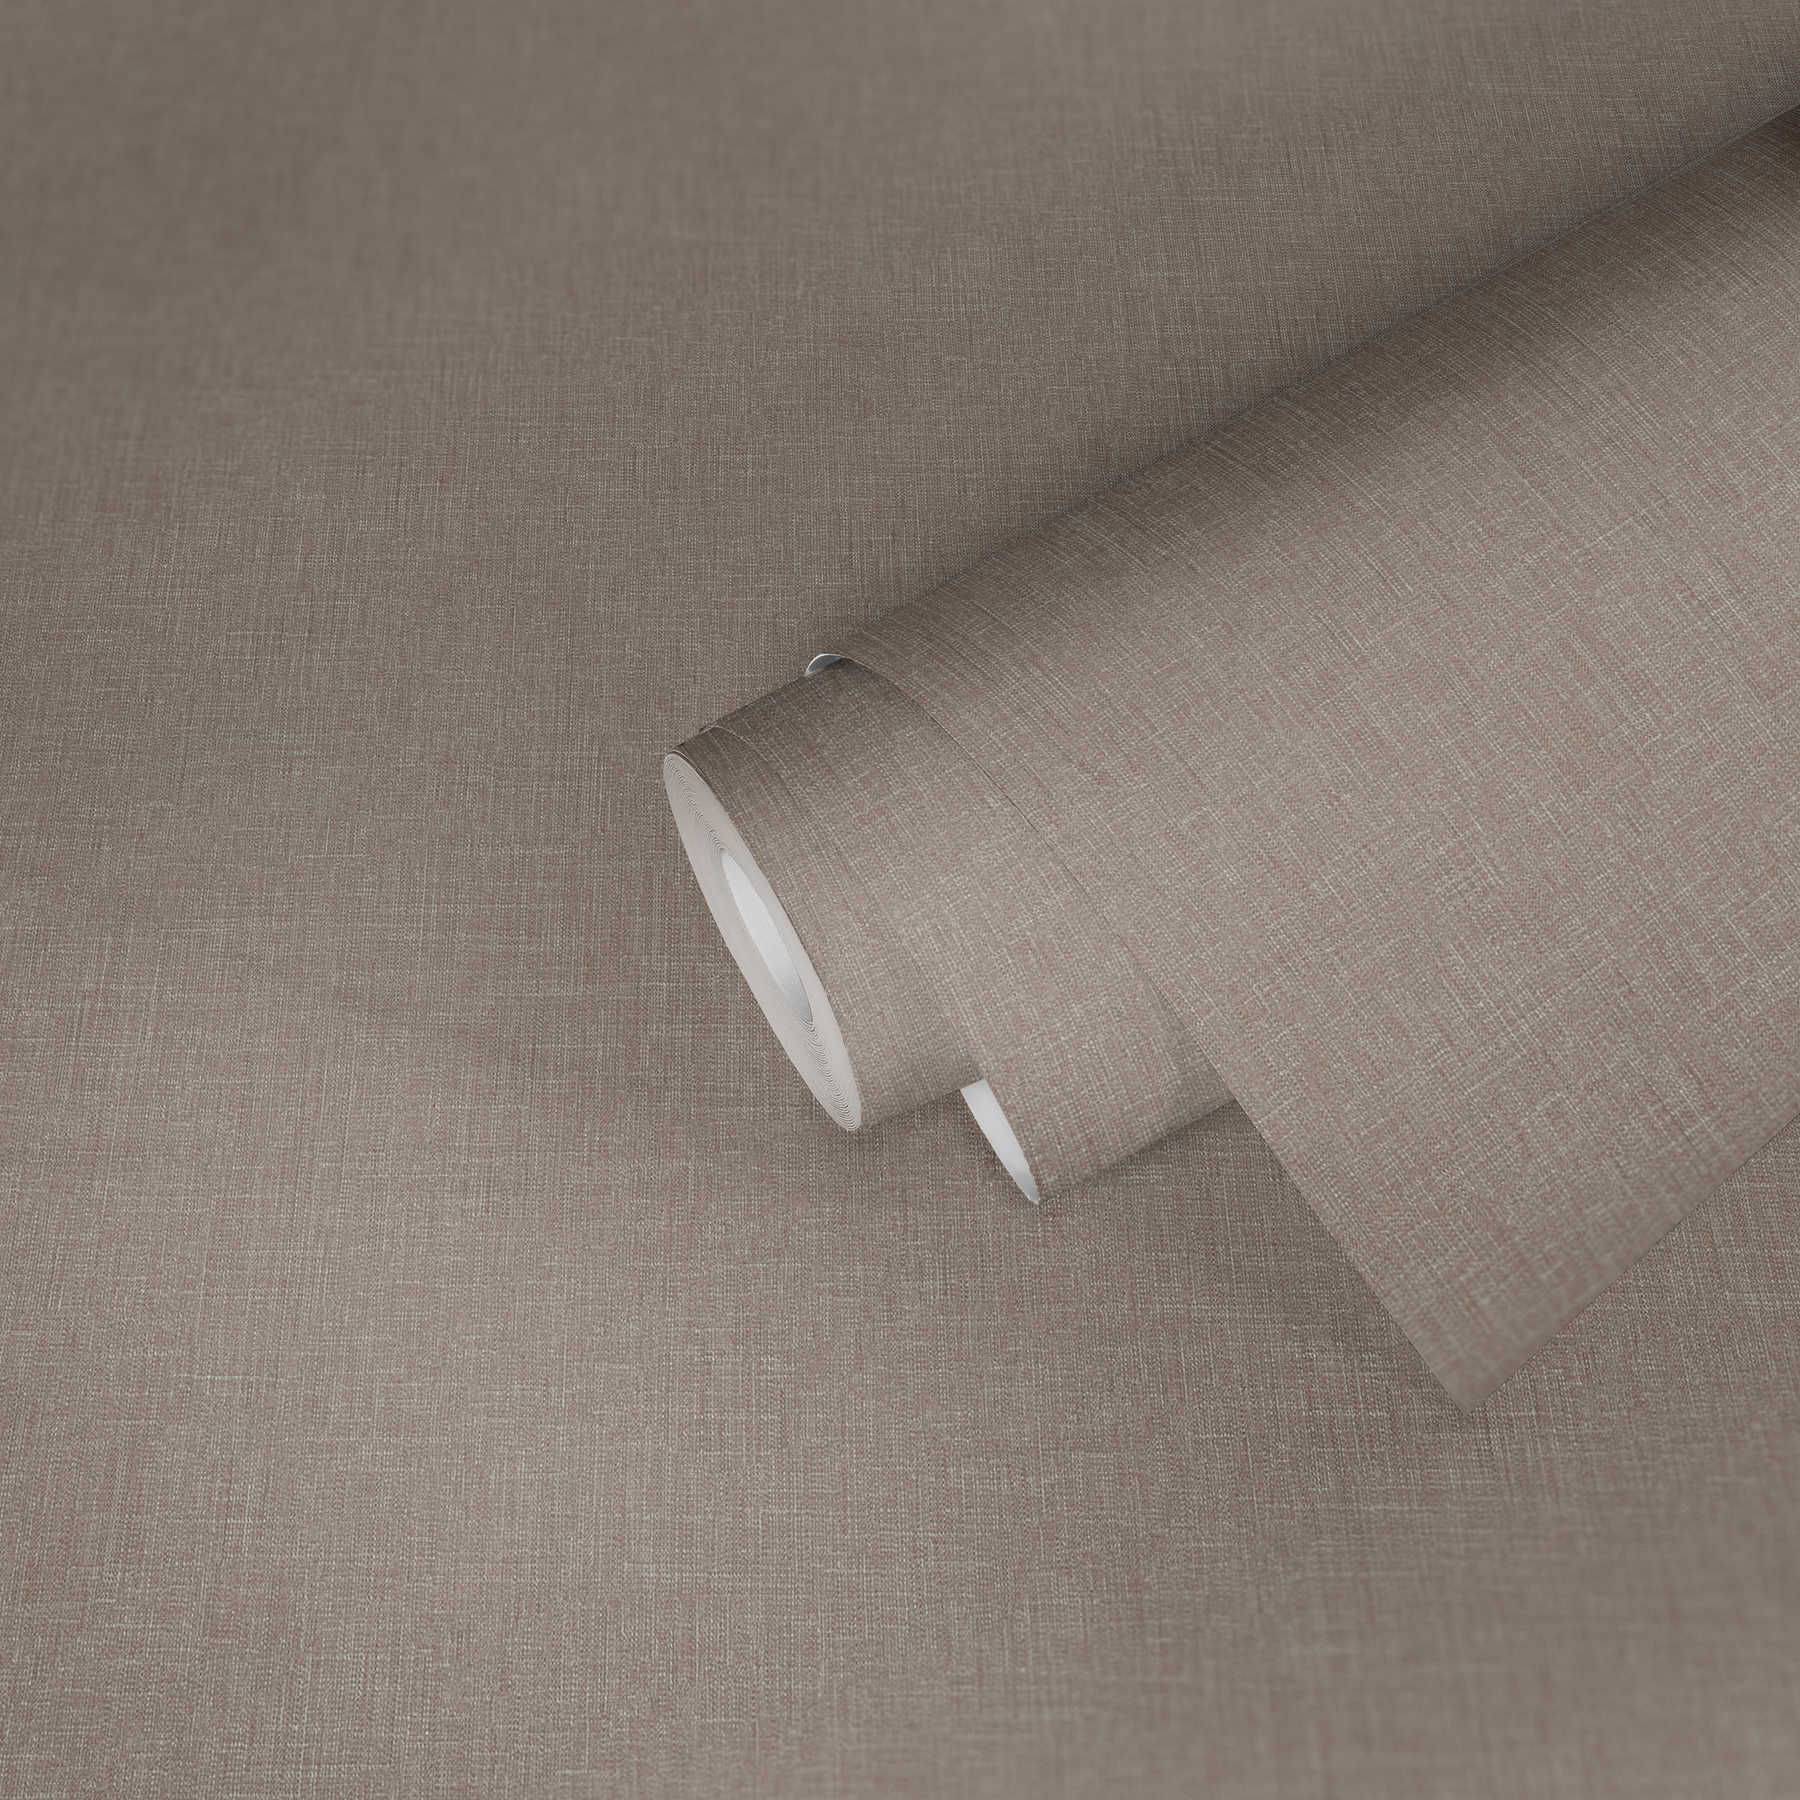             Melange wallpaper greige with textile look & structure
        